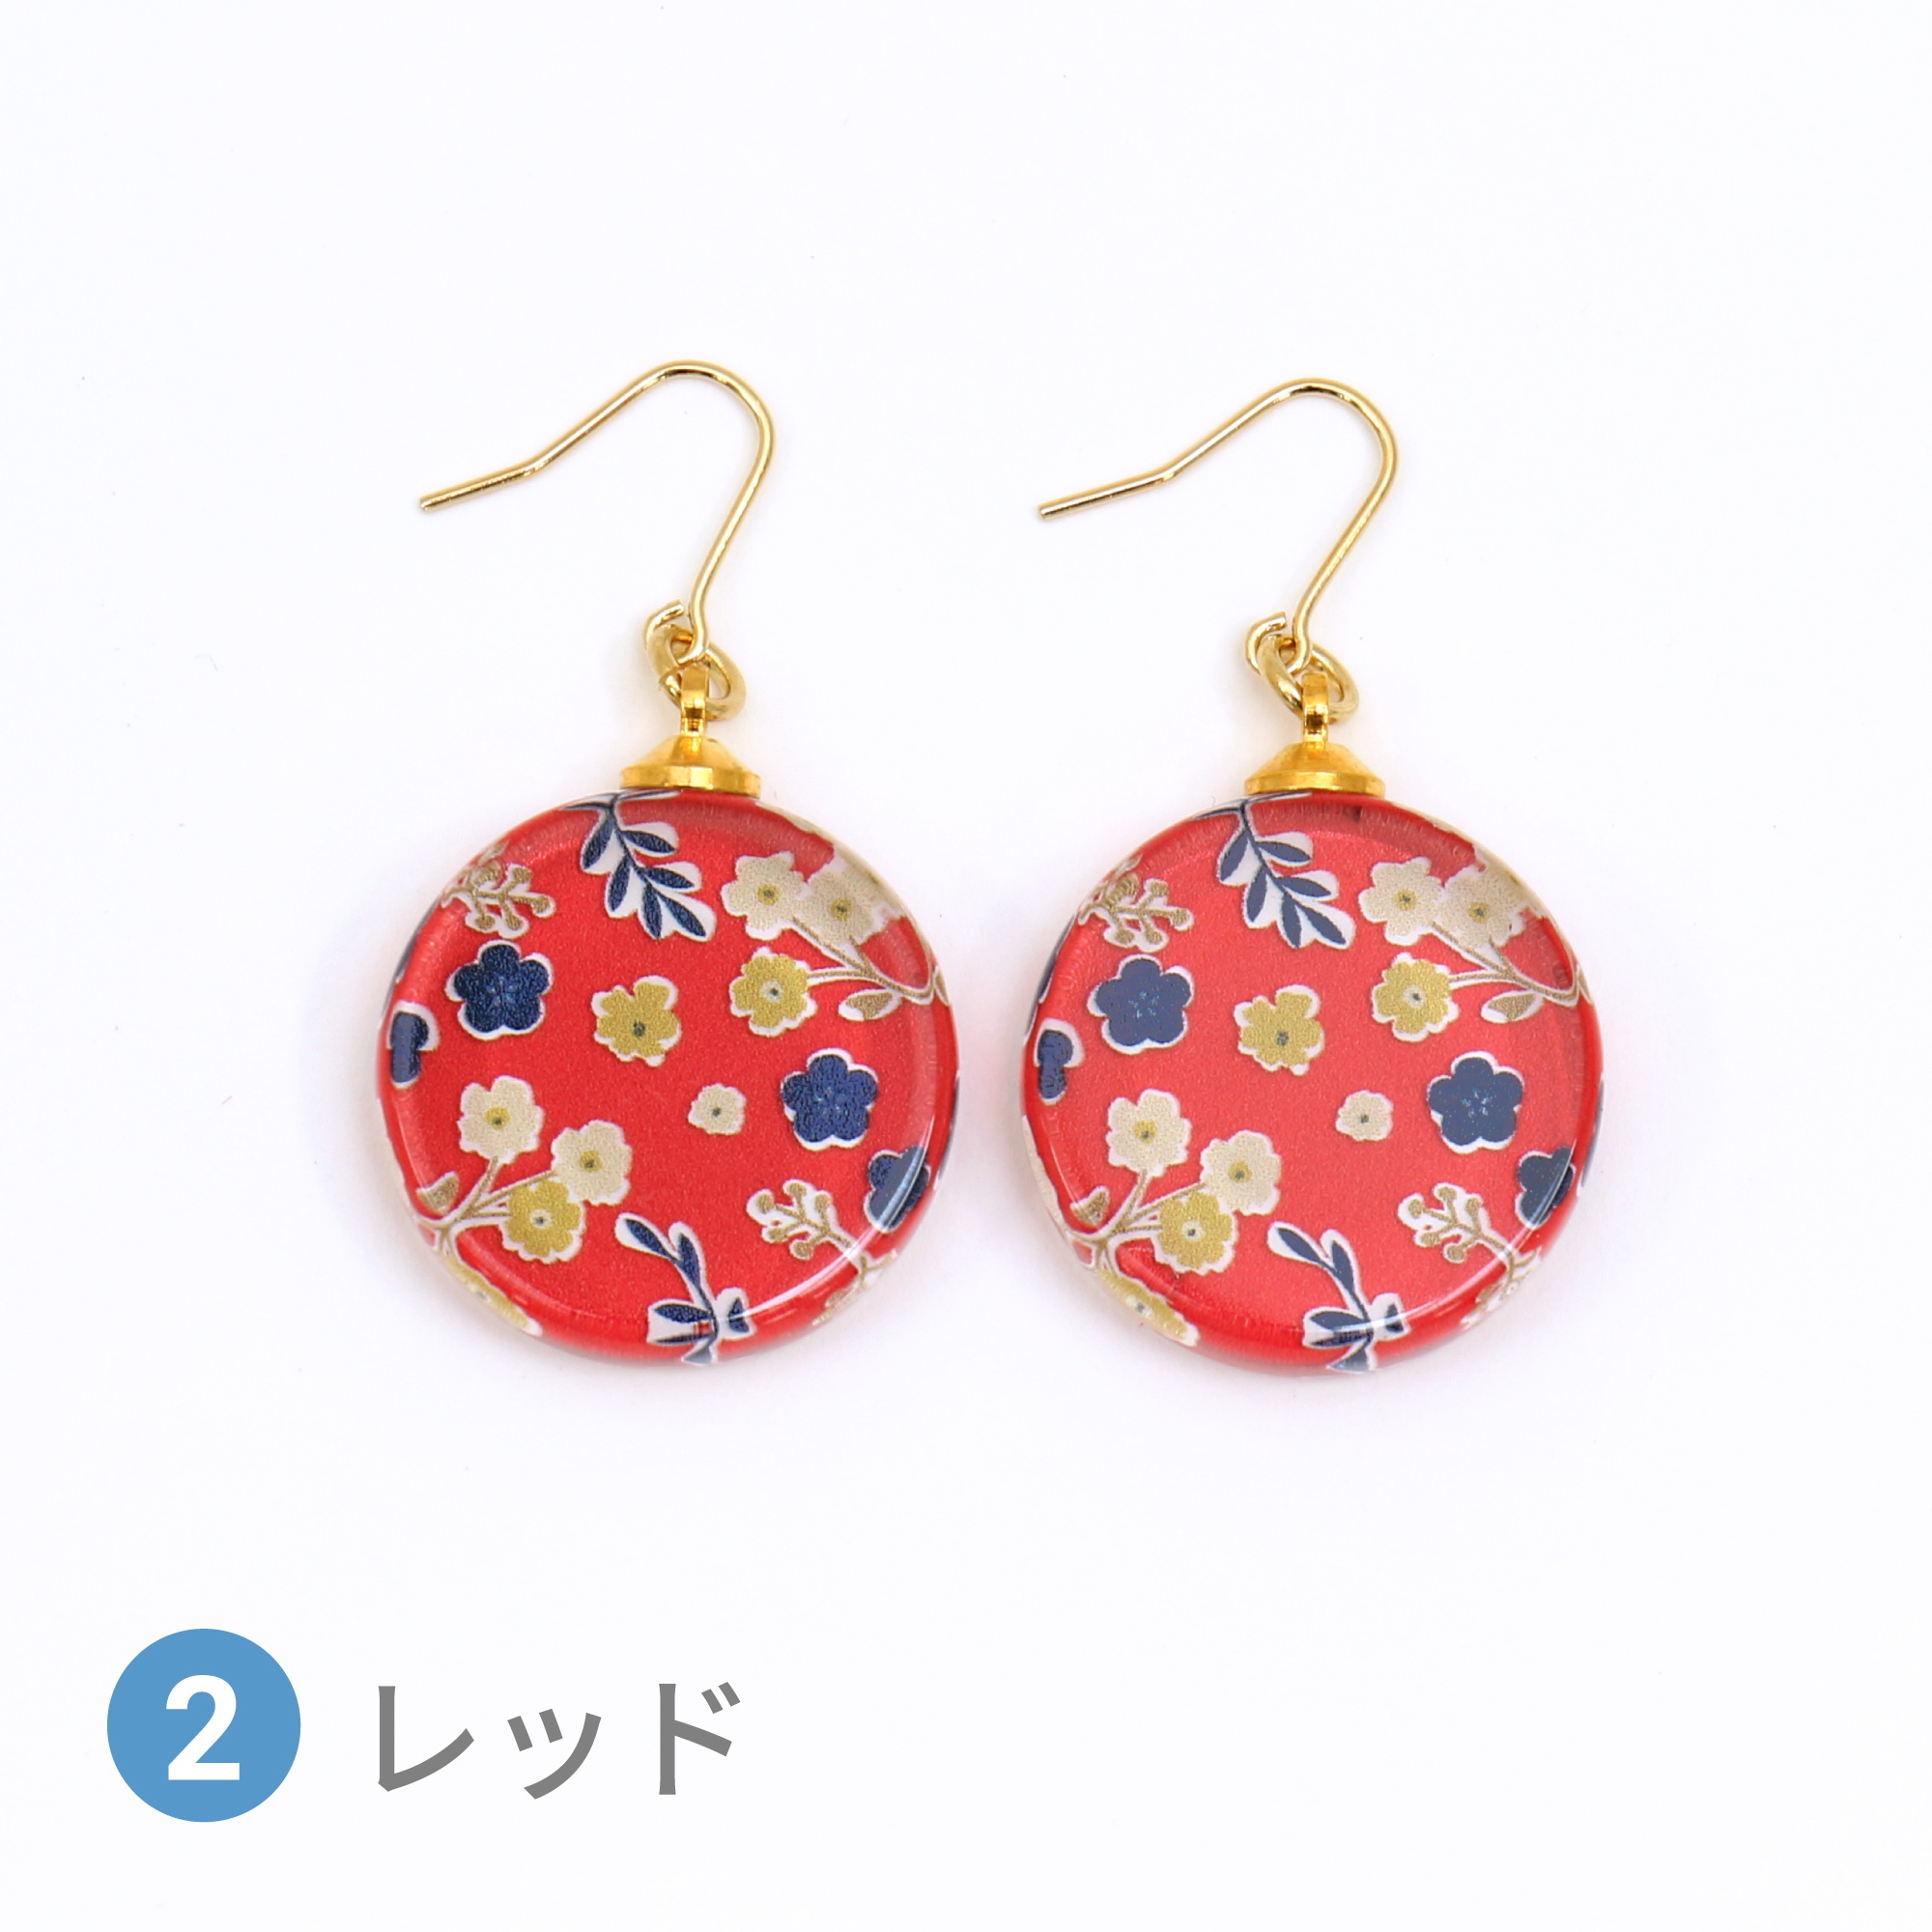 Glass accessories Pierced Earring FLORAL PATTERN red round shape